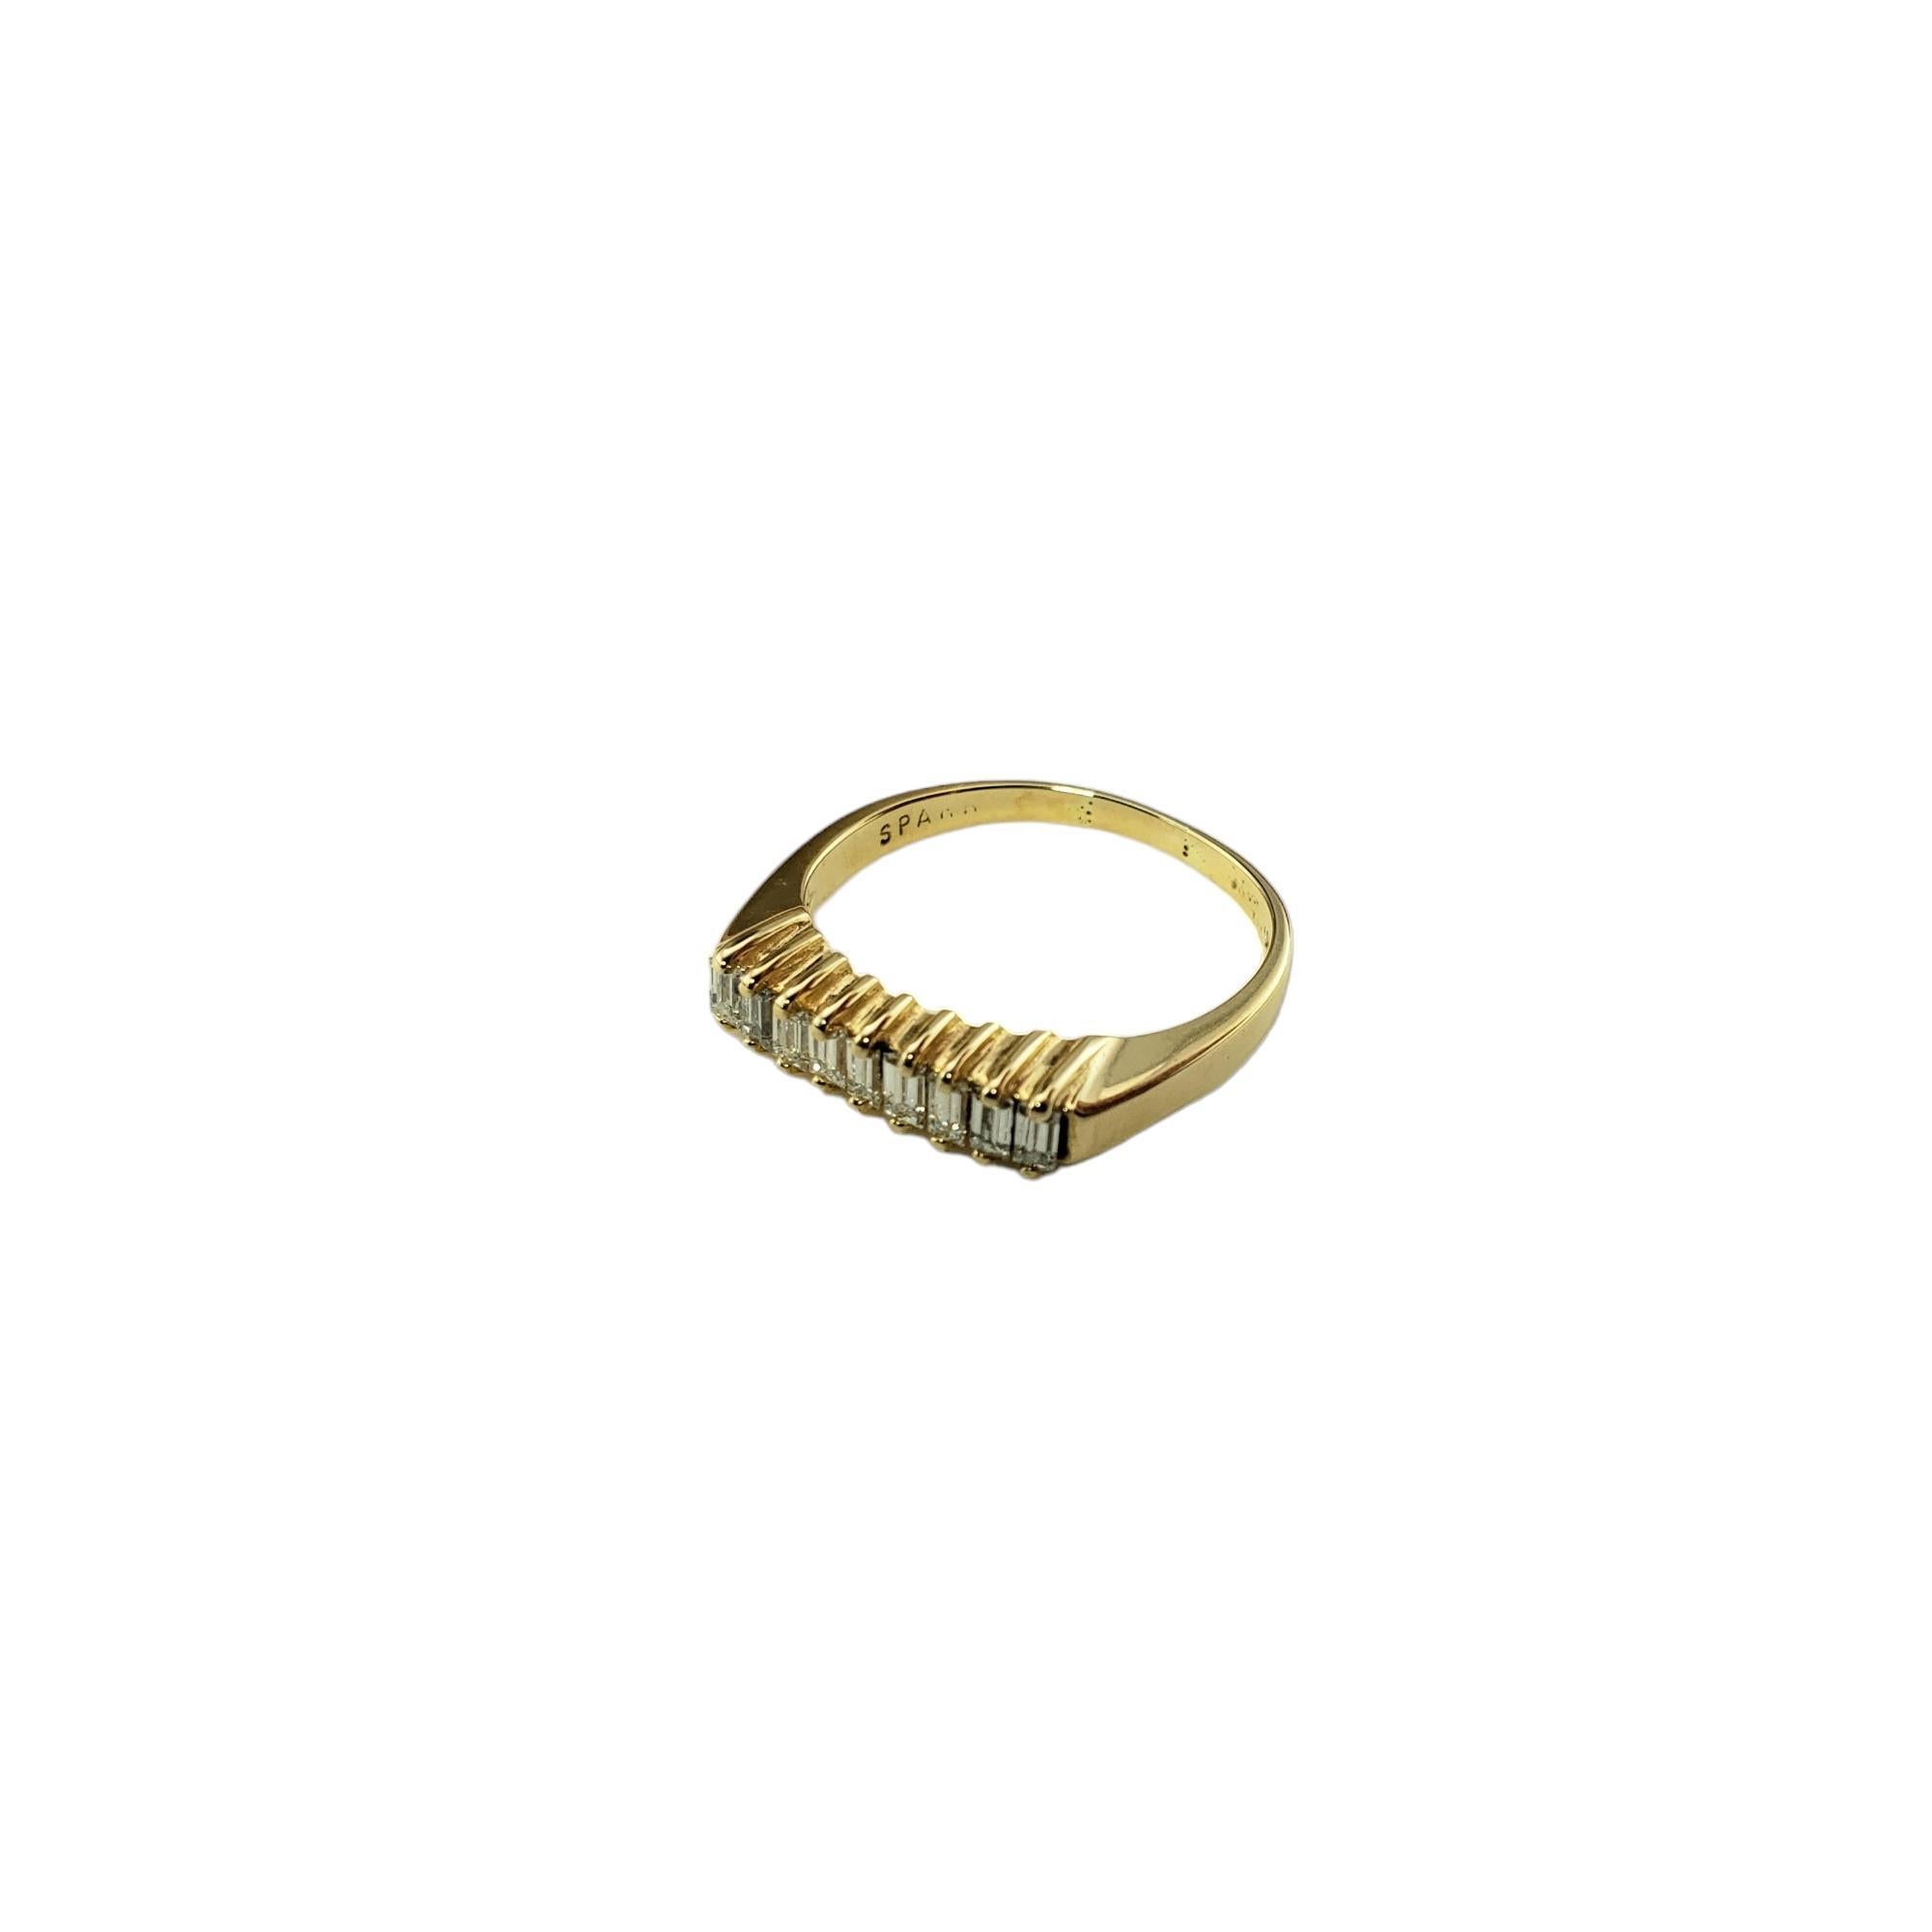 Baguette Cut 14 Karat Yellow Gold and Diamond Ring Size 6.5 #15966 For Sale